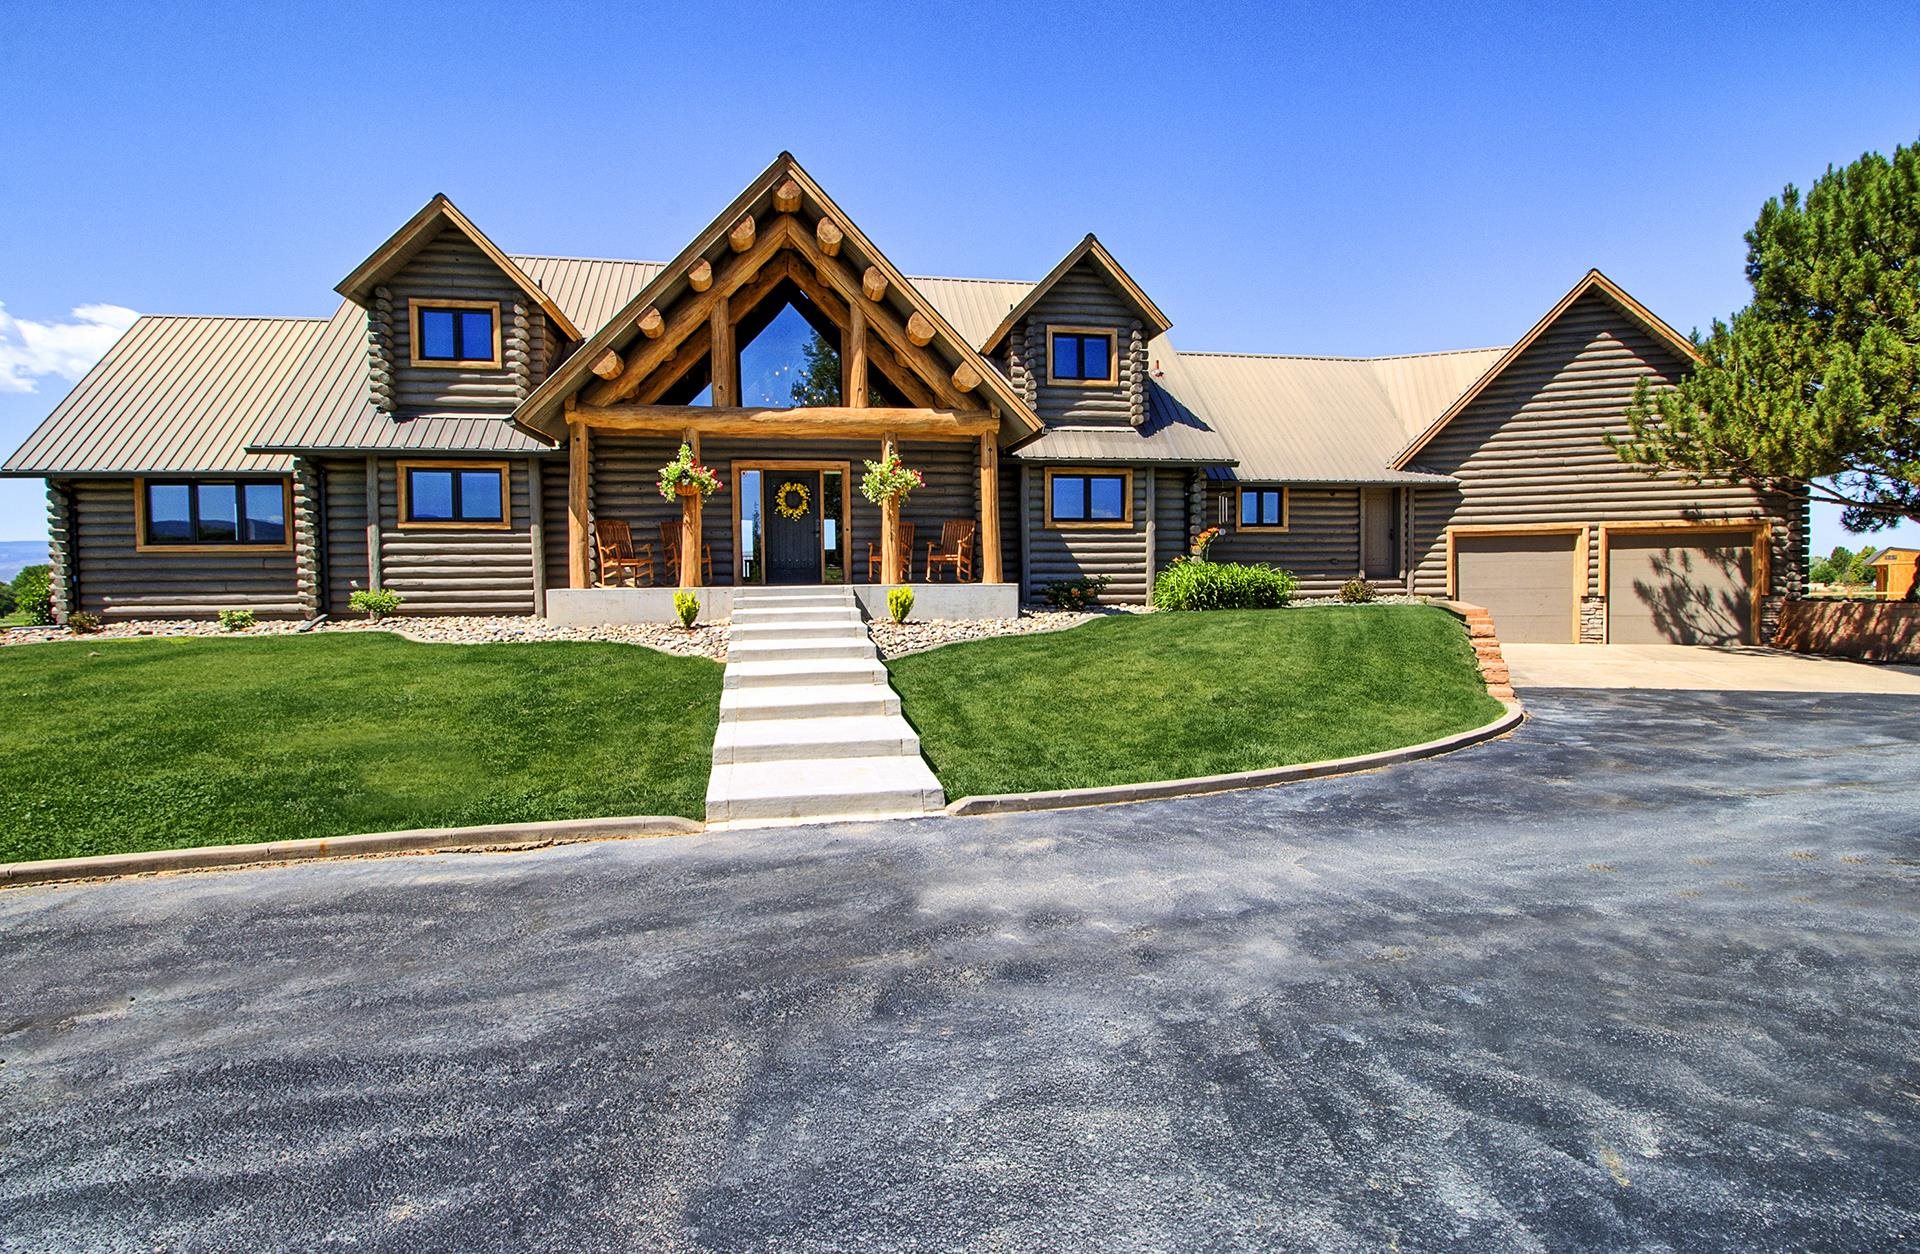 The incredible feel of a contemporary mountain log home awaits you on a picturesque 6-acre setting in the premier North area of Grand Junction,  among some of the most sought-after real estate in Western Colorado.  Framed structure, chinked log siding, metal roof, dormer windows, vaulted ceilings, and elevated panoramic views all add to the ambiance of this home.  5 Bd, 5 Bth, +office, multiple living areas, floor-to-ceiling stone fireplace, and huge deck for entertaining.  Hardwood floors, stainless steel appliances, and granite countertops are just a few upgrades you will see.  The master suite has an enormous walk-in closet, center island dressers, and a hot tub out it's back door.  If you have bikes or horses and want a place to ride them this is a dream come true, the trails of the western Colorado desert are right up the road.  Plenty of room for a shop, garden, greenhouse or whatever your heart desires.  This incredible property offers true end-of-the-road privacy.